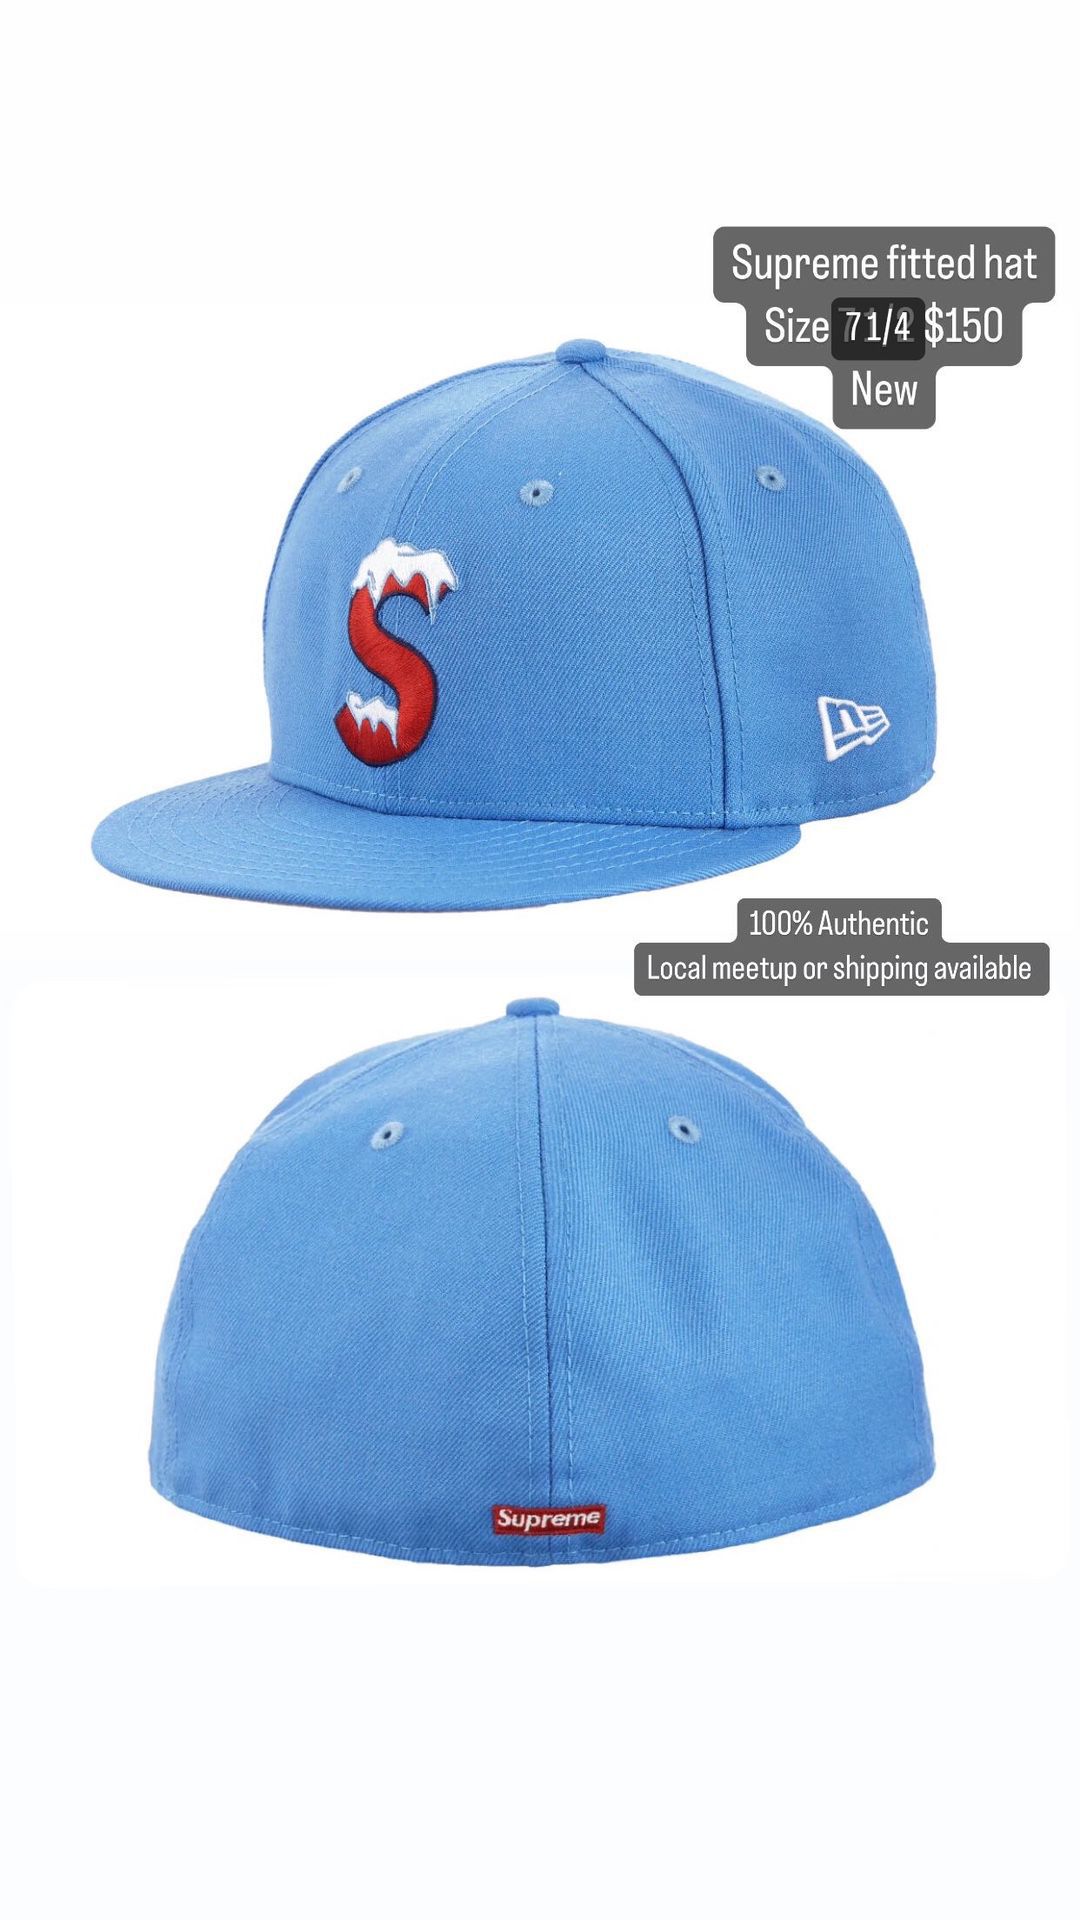 Supreme Fitted Hats Size 7 1/4 $ 7 1/2